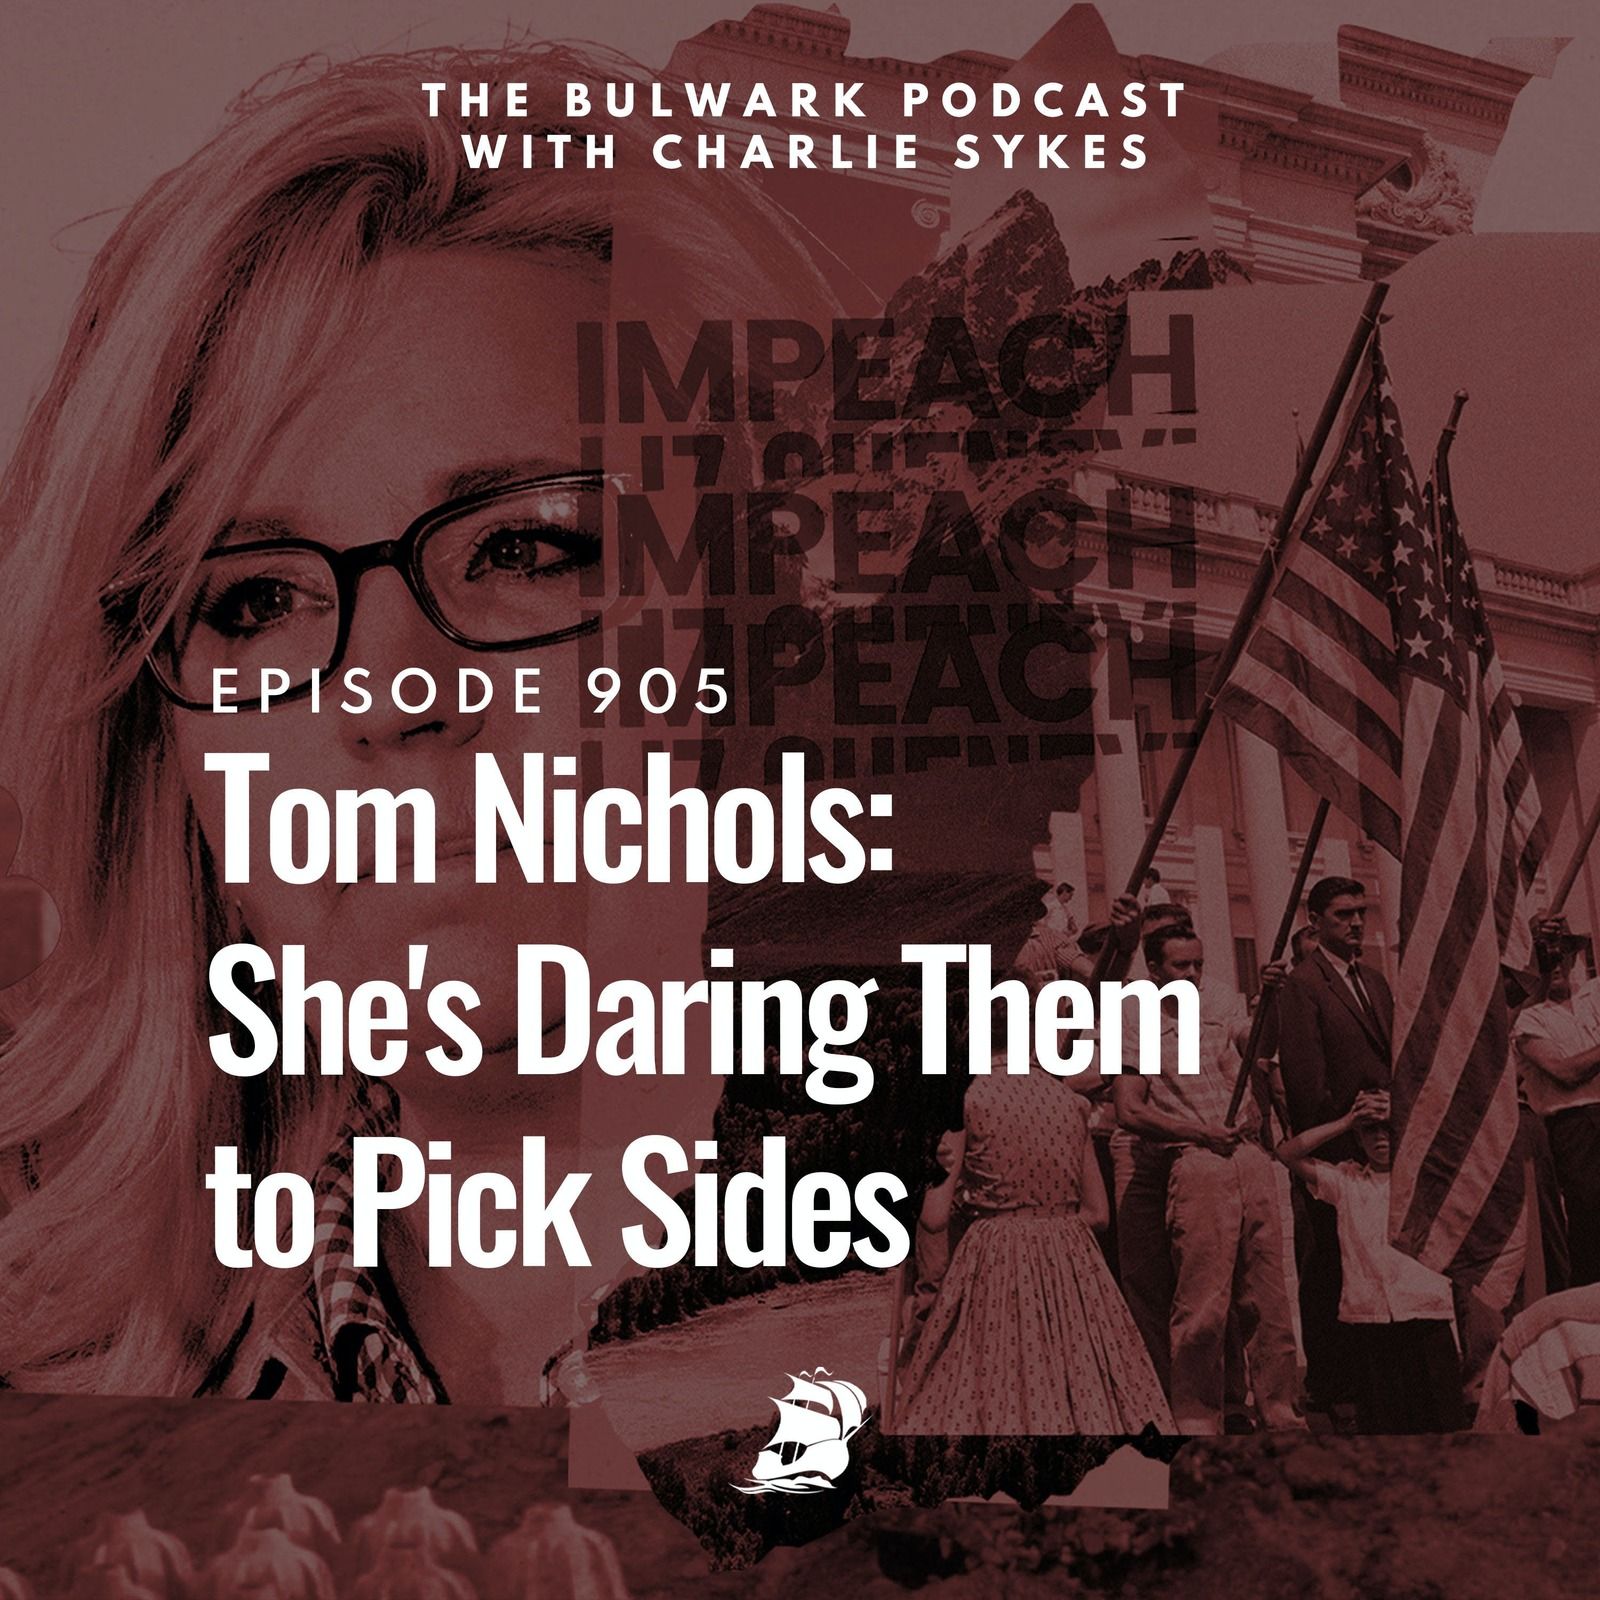 Tom Nichols: She's Daring Them to Pick Sides by The Bulwark Podcast